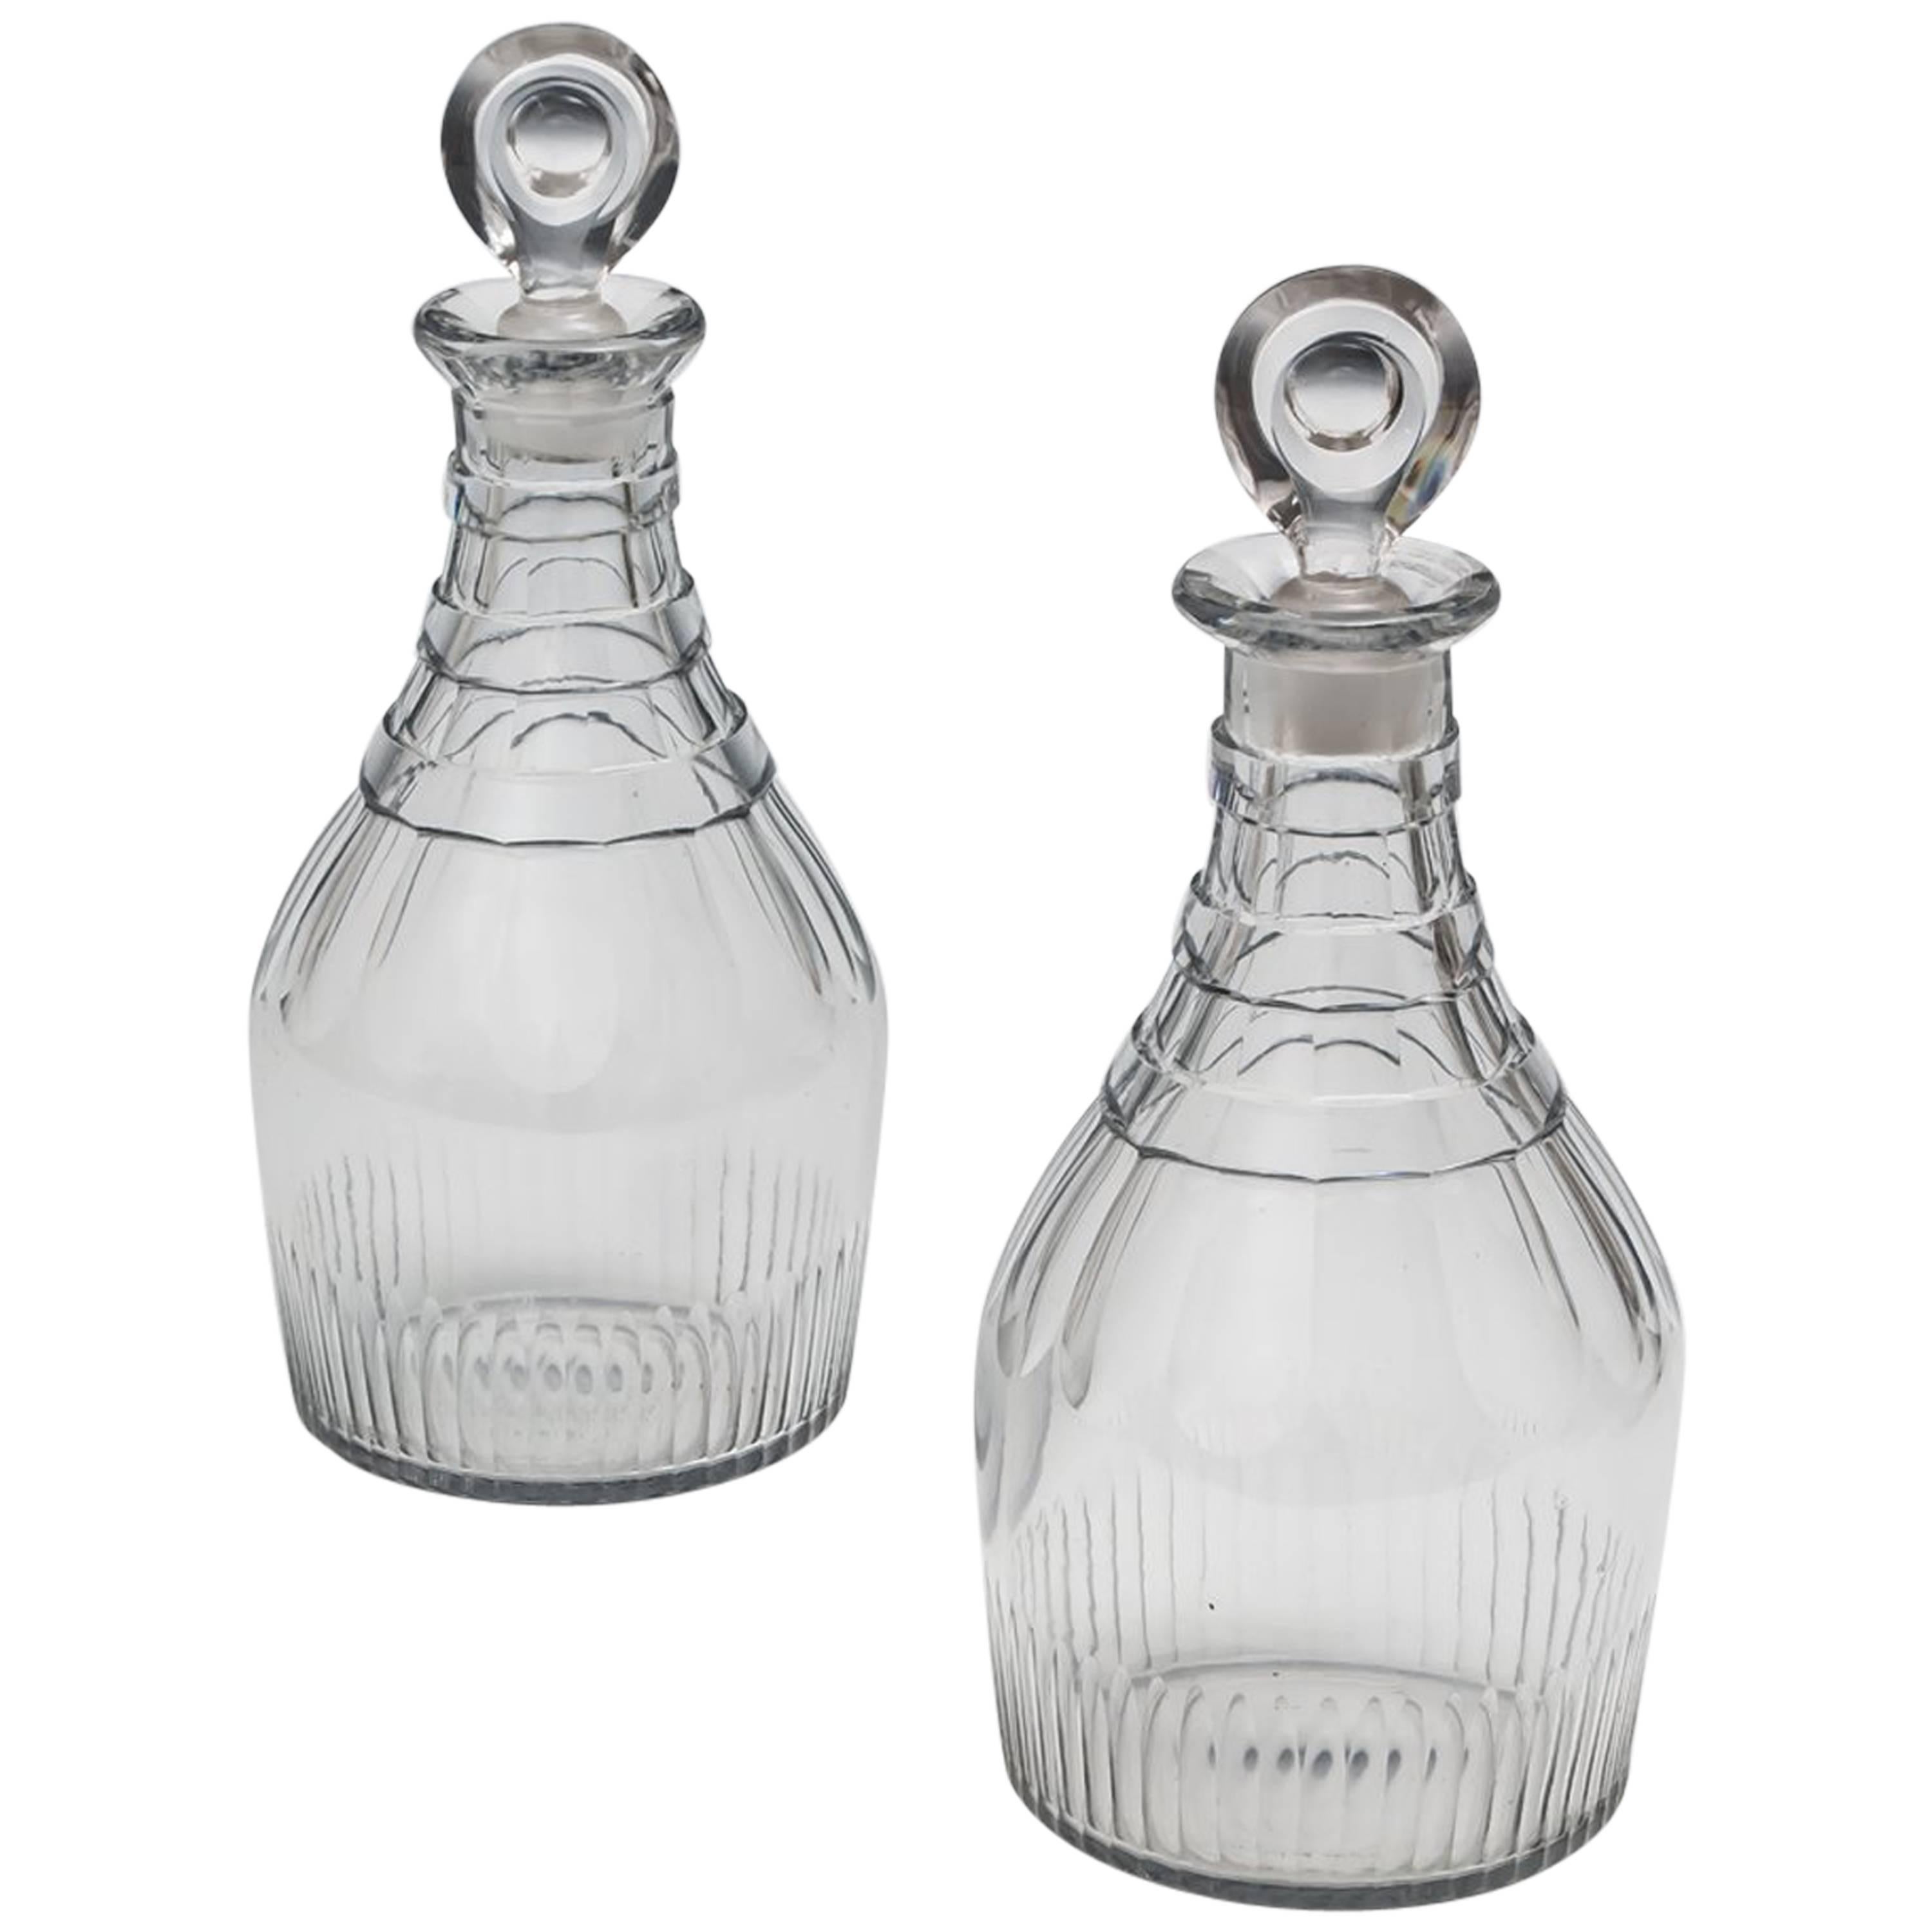 Pair of Slice and Flute Cut Georgian Decanters